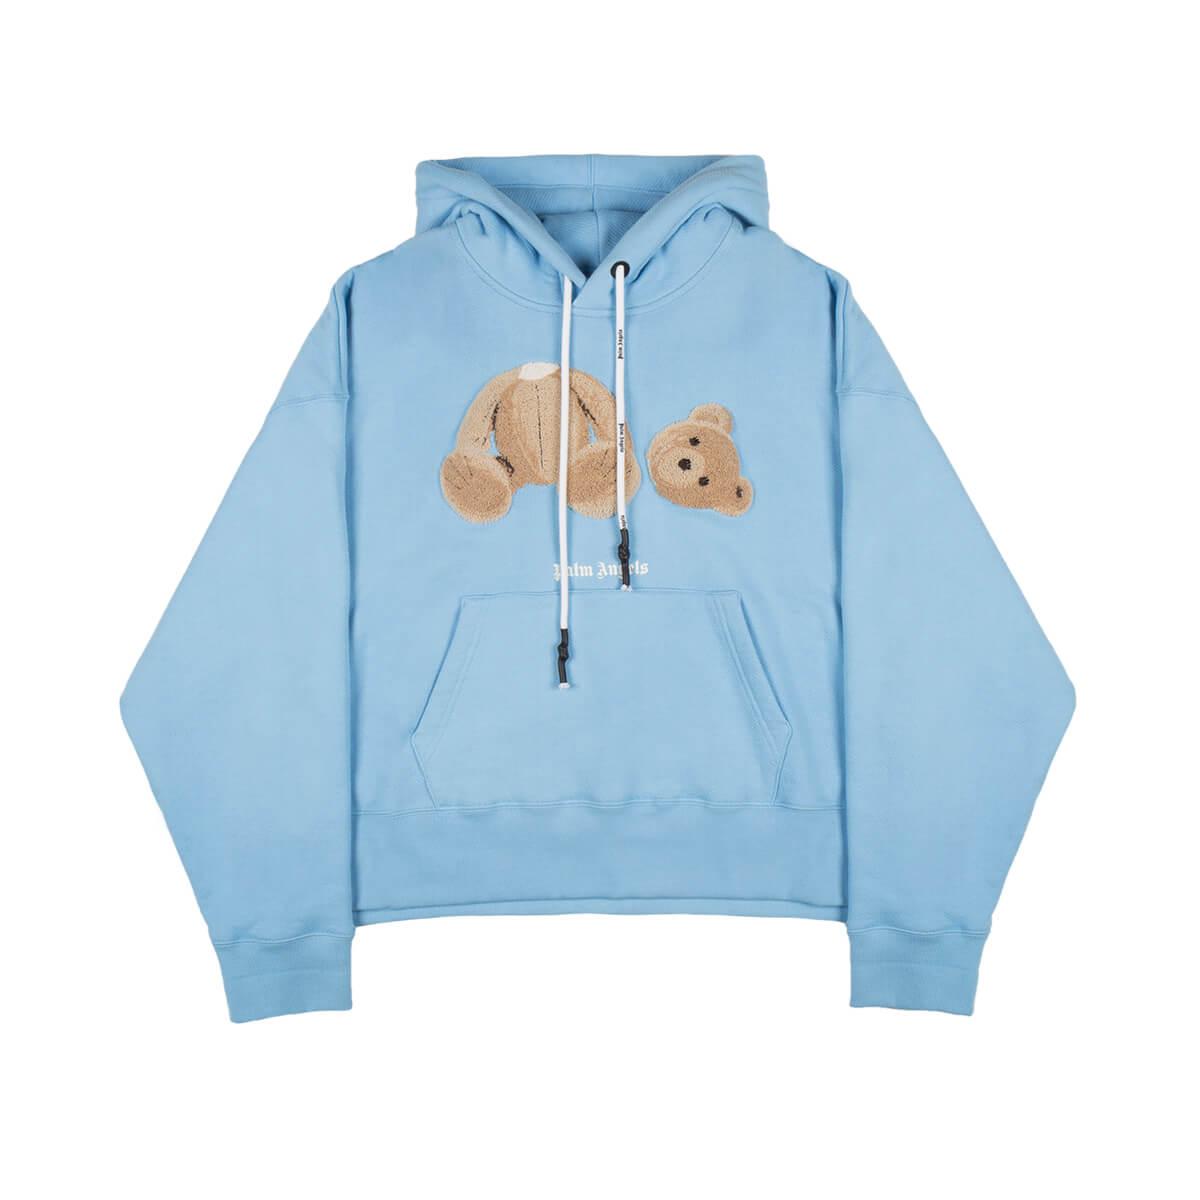 Palm Angels Cotton Ripped-teddy-bear-embroidered Hoodie in Light Blue  (Blue) for Men | Lyst